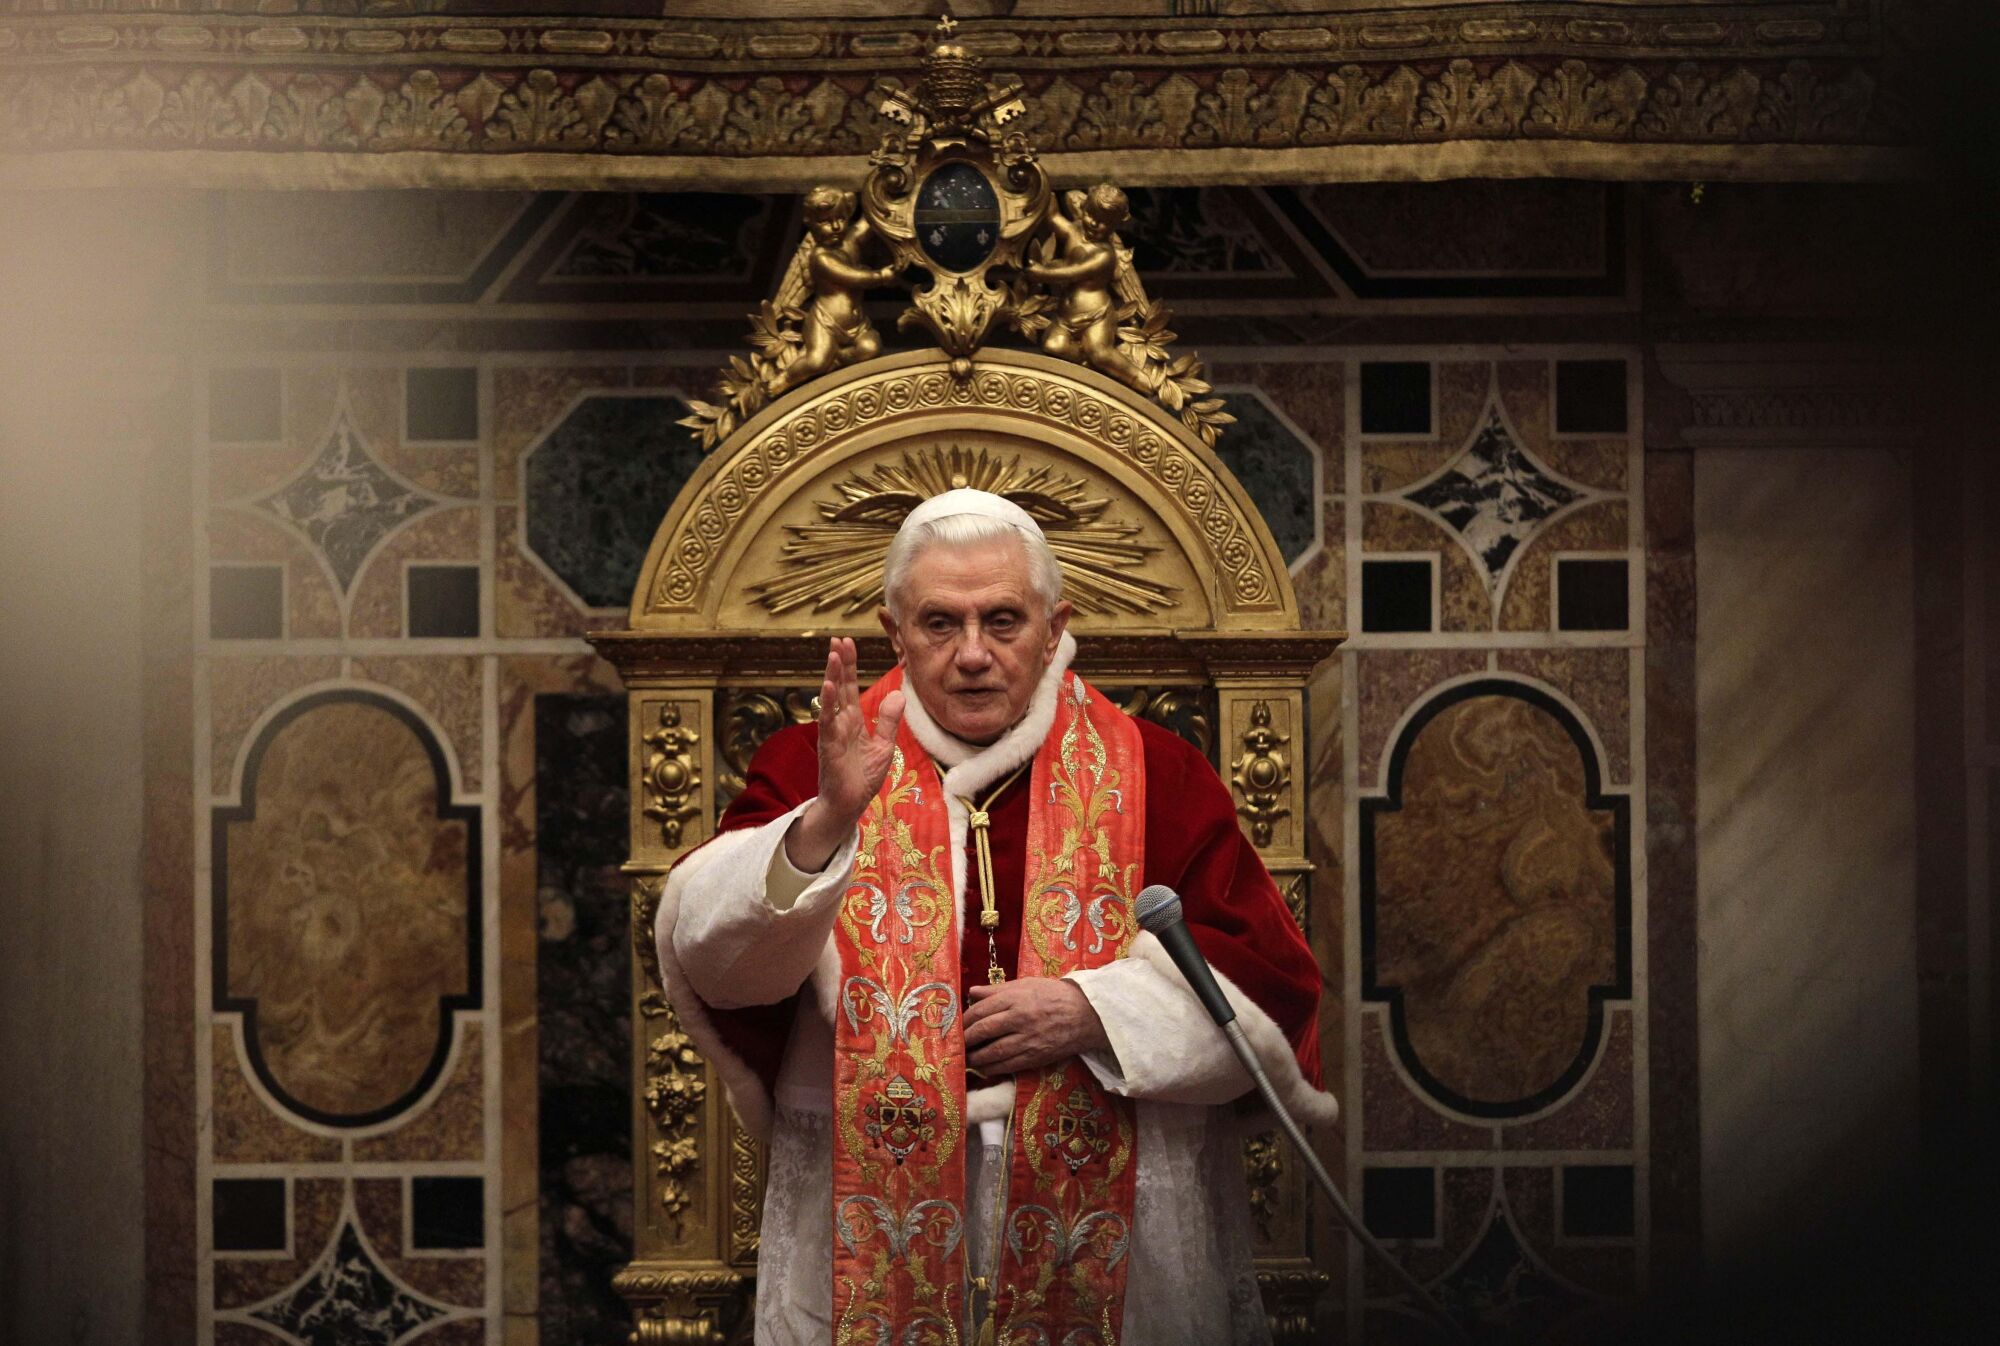 Pope Benedict XVI delivers his blessing in red and white robes.